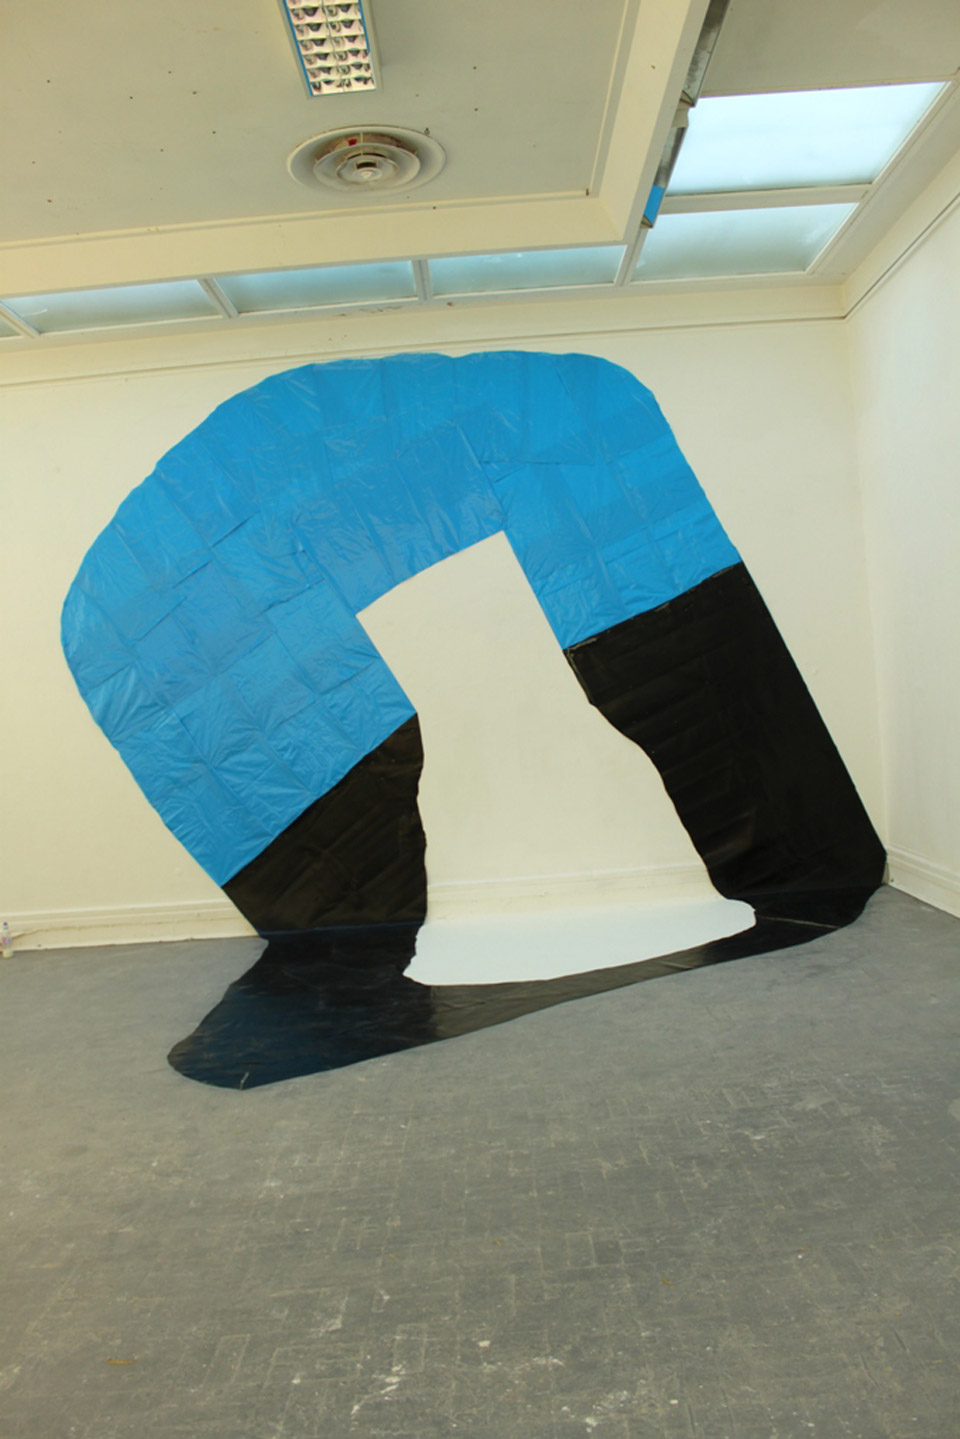 <p>Wall drawing XI (For Alice), 2012, rubble sacks, rubber flooring, marker pen, emulsion paint, 380 x 220 x 180 cm</p>